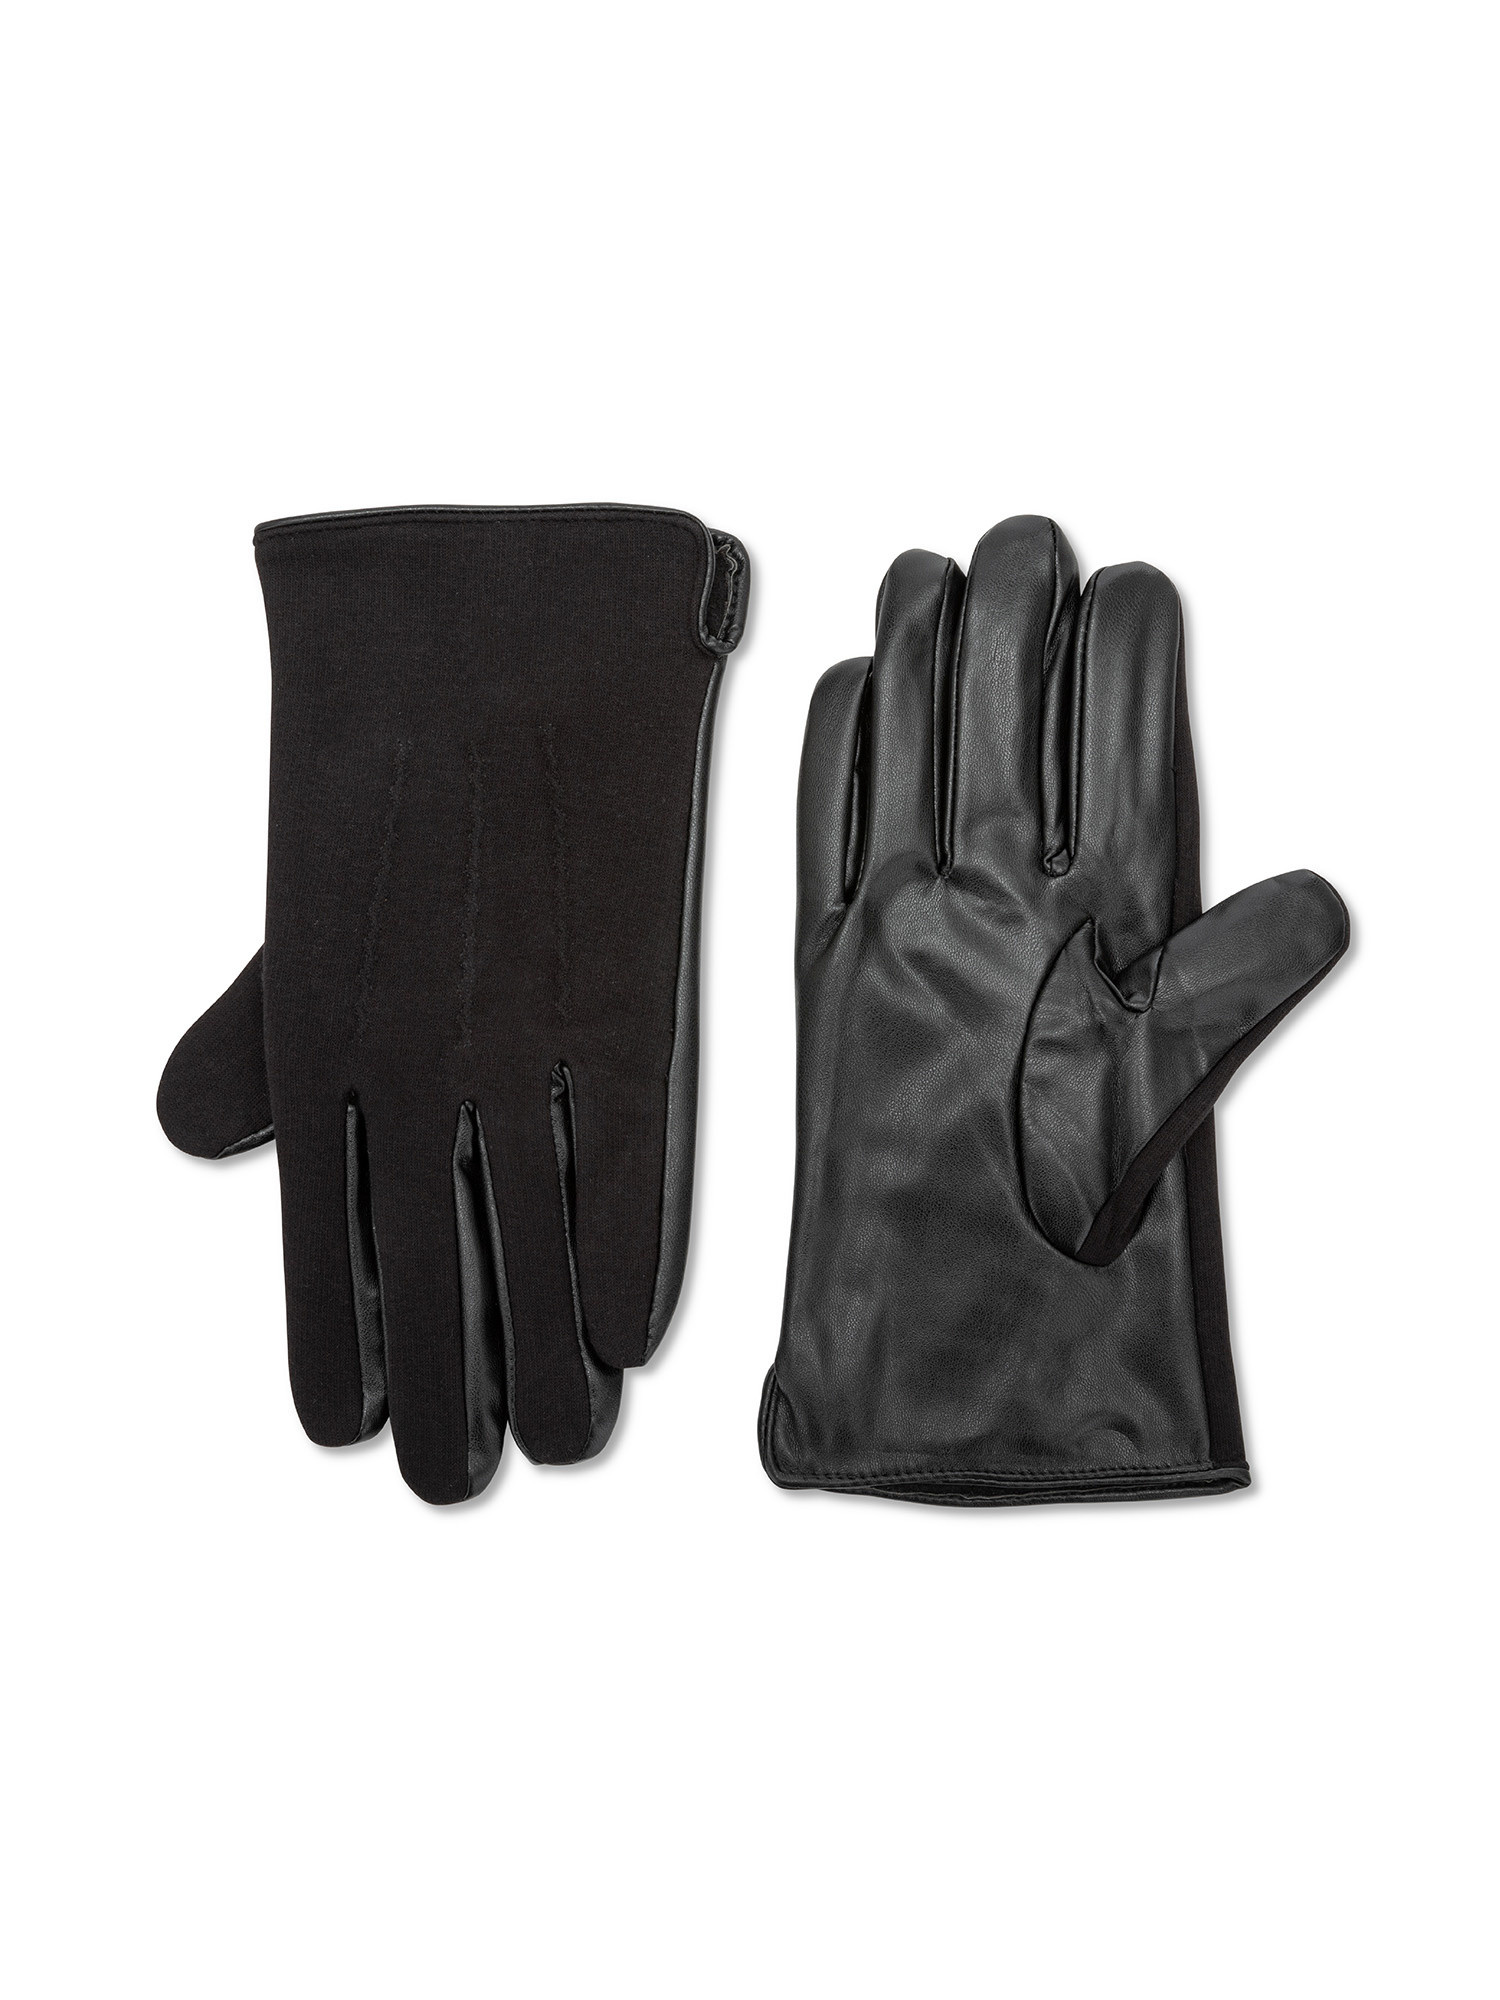 Luca D'Altieri - Gloves in jersey and eco-leather, Black, large image number 0